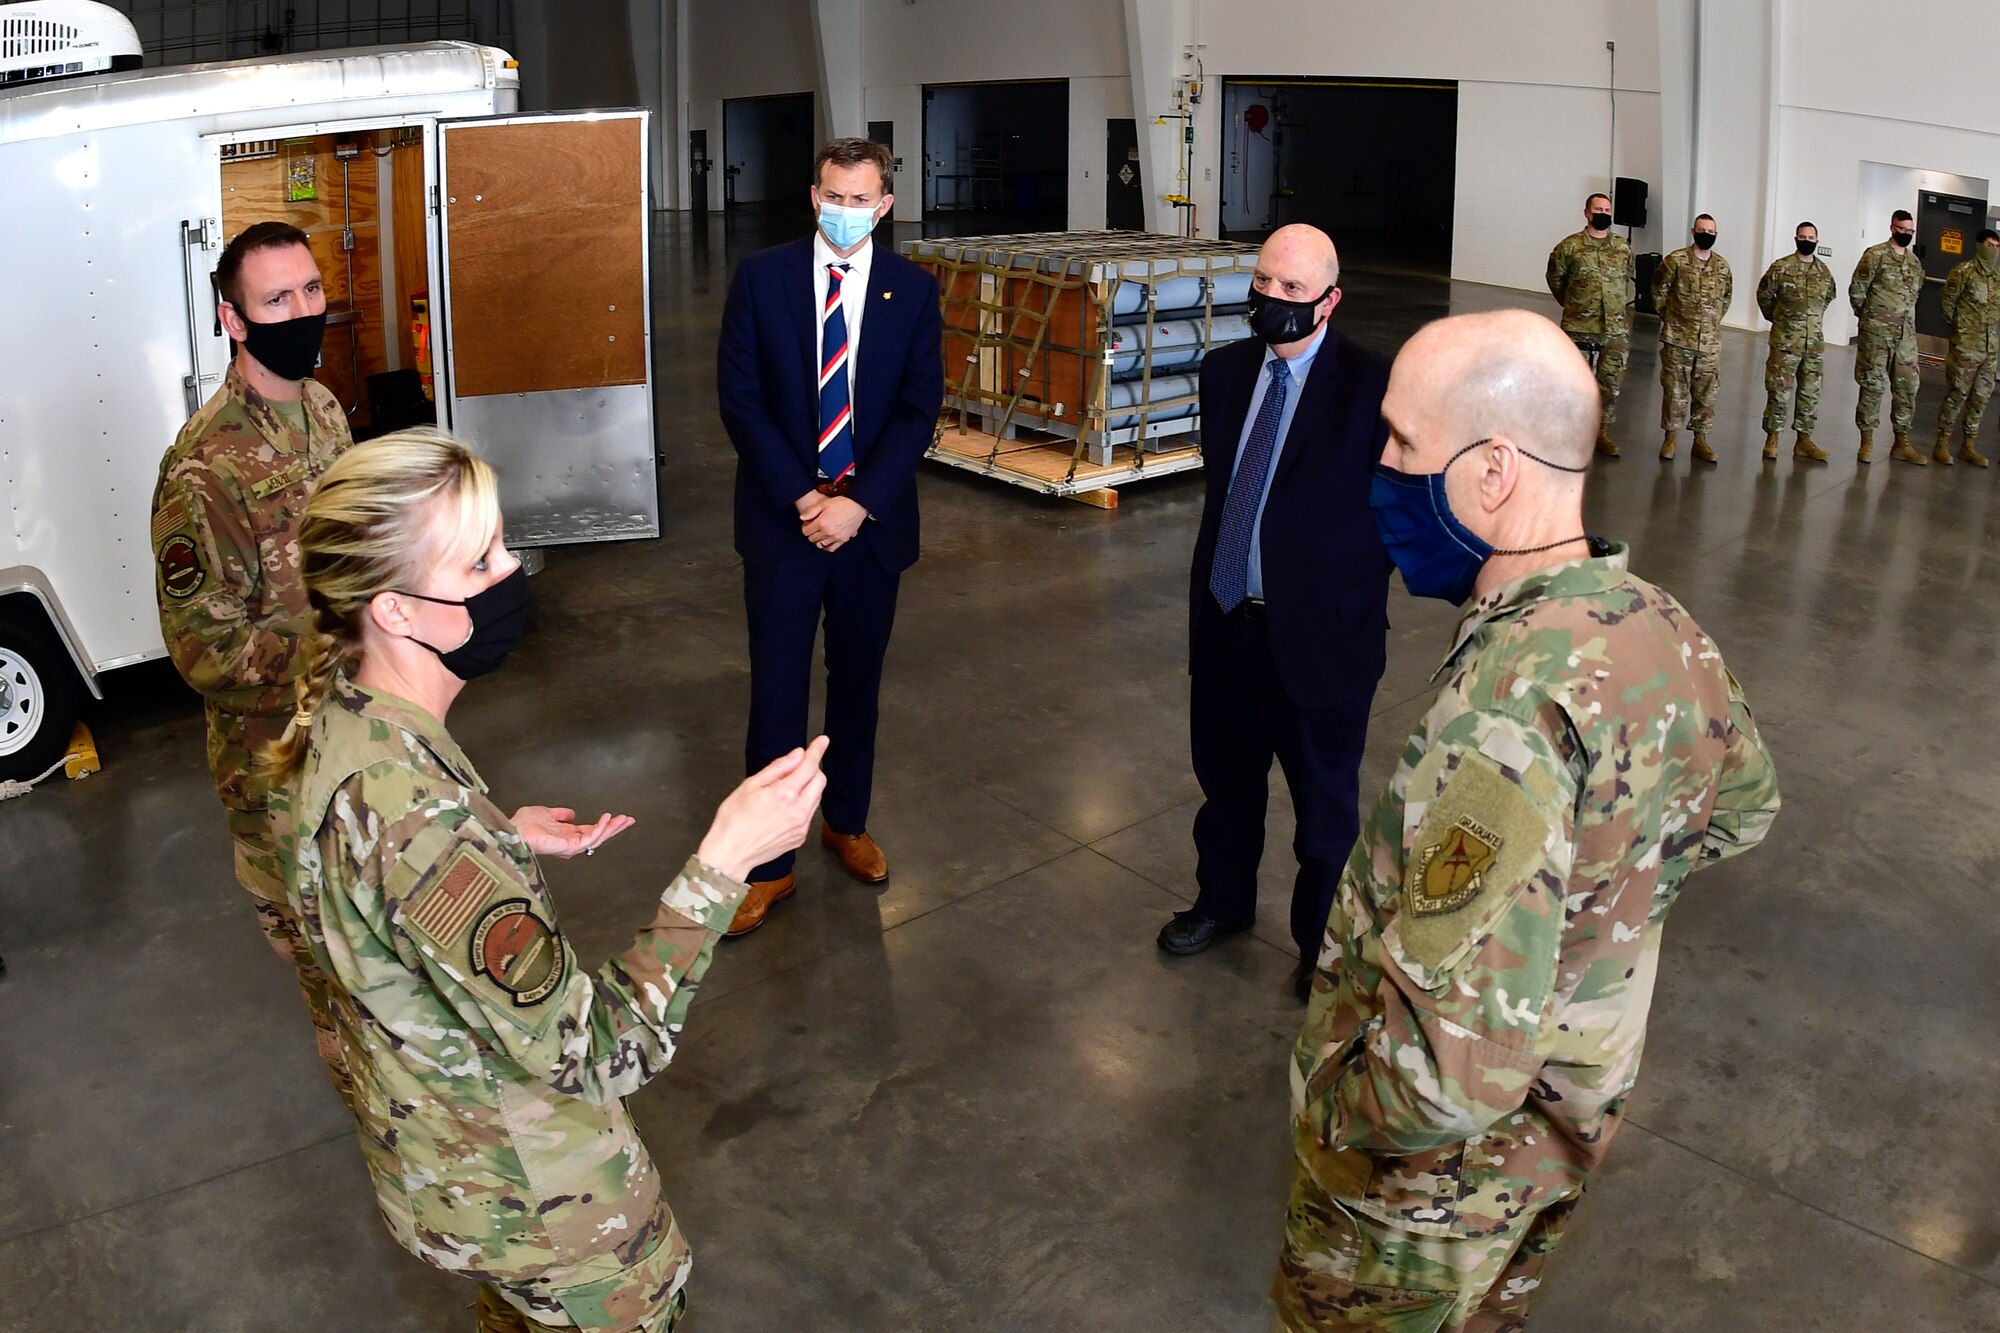 Lt. Col. Naomi Franchetti (front left), 649th Munitions Squadron commander, addresses (left to right) Senior Master Sgt. Dayton Wenzel, 649th MUNS, U.S. Rep. Blake Moore, R-Utah, Acting Secretary of the Air Force John Roth, and Gen. David Allvin, Vice Chief of Staff of the Air Force.